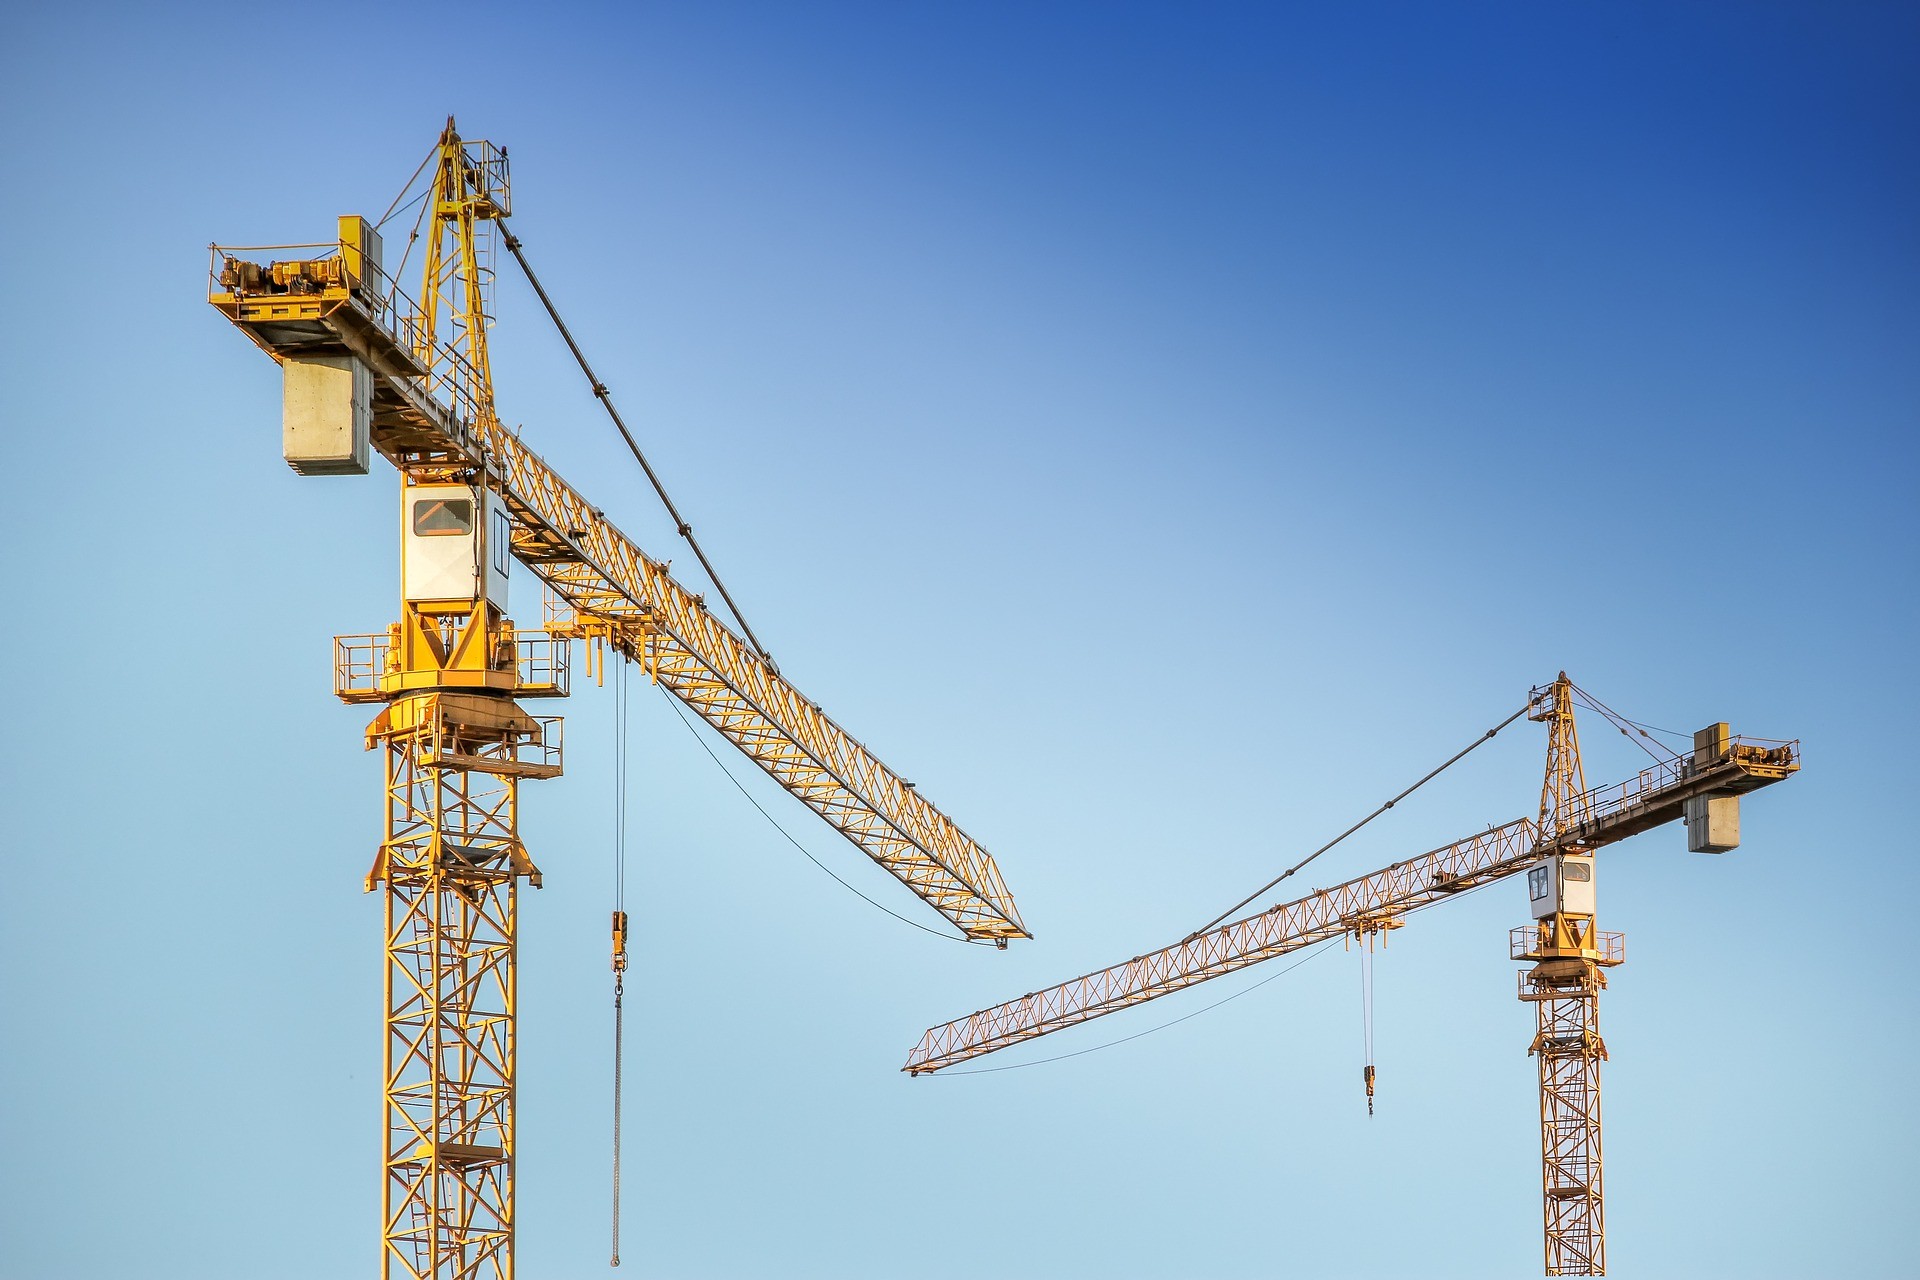 ALL YOU NEED TO KNOW ABOUT CRANES